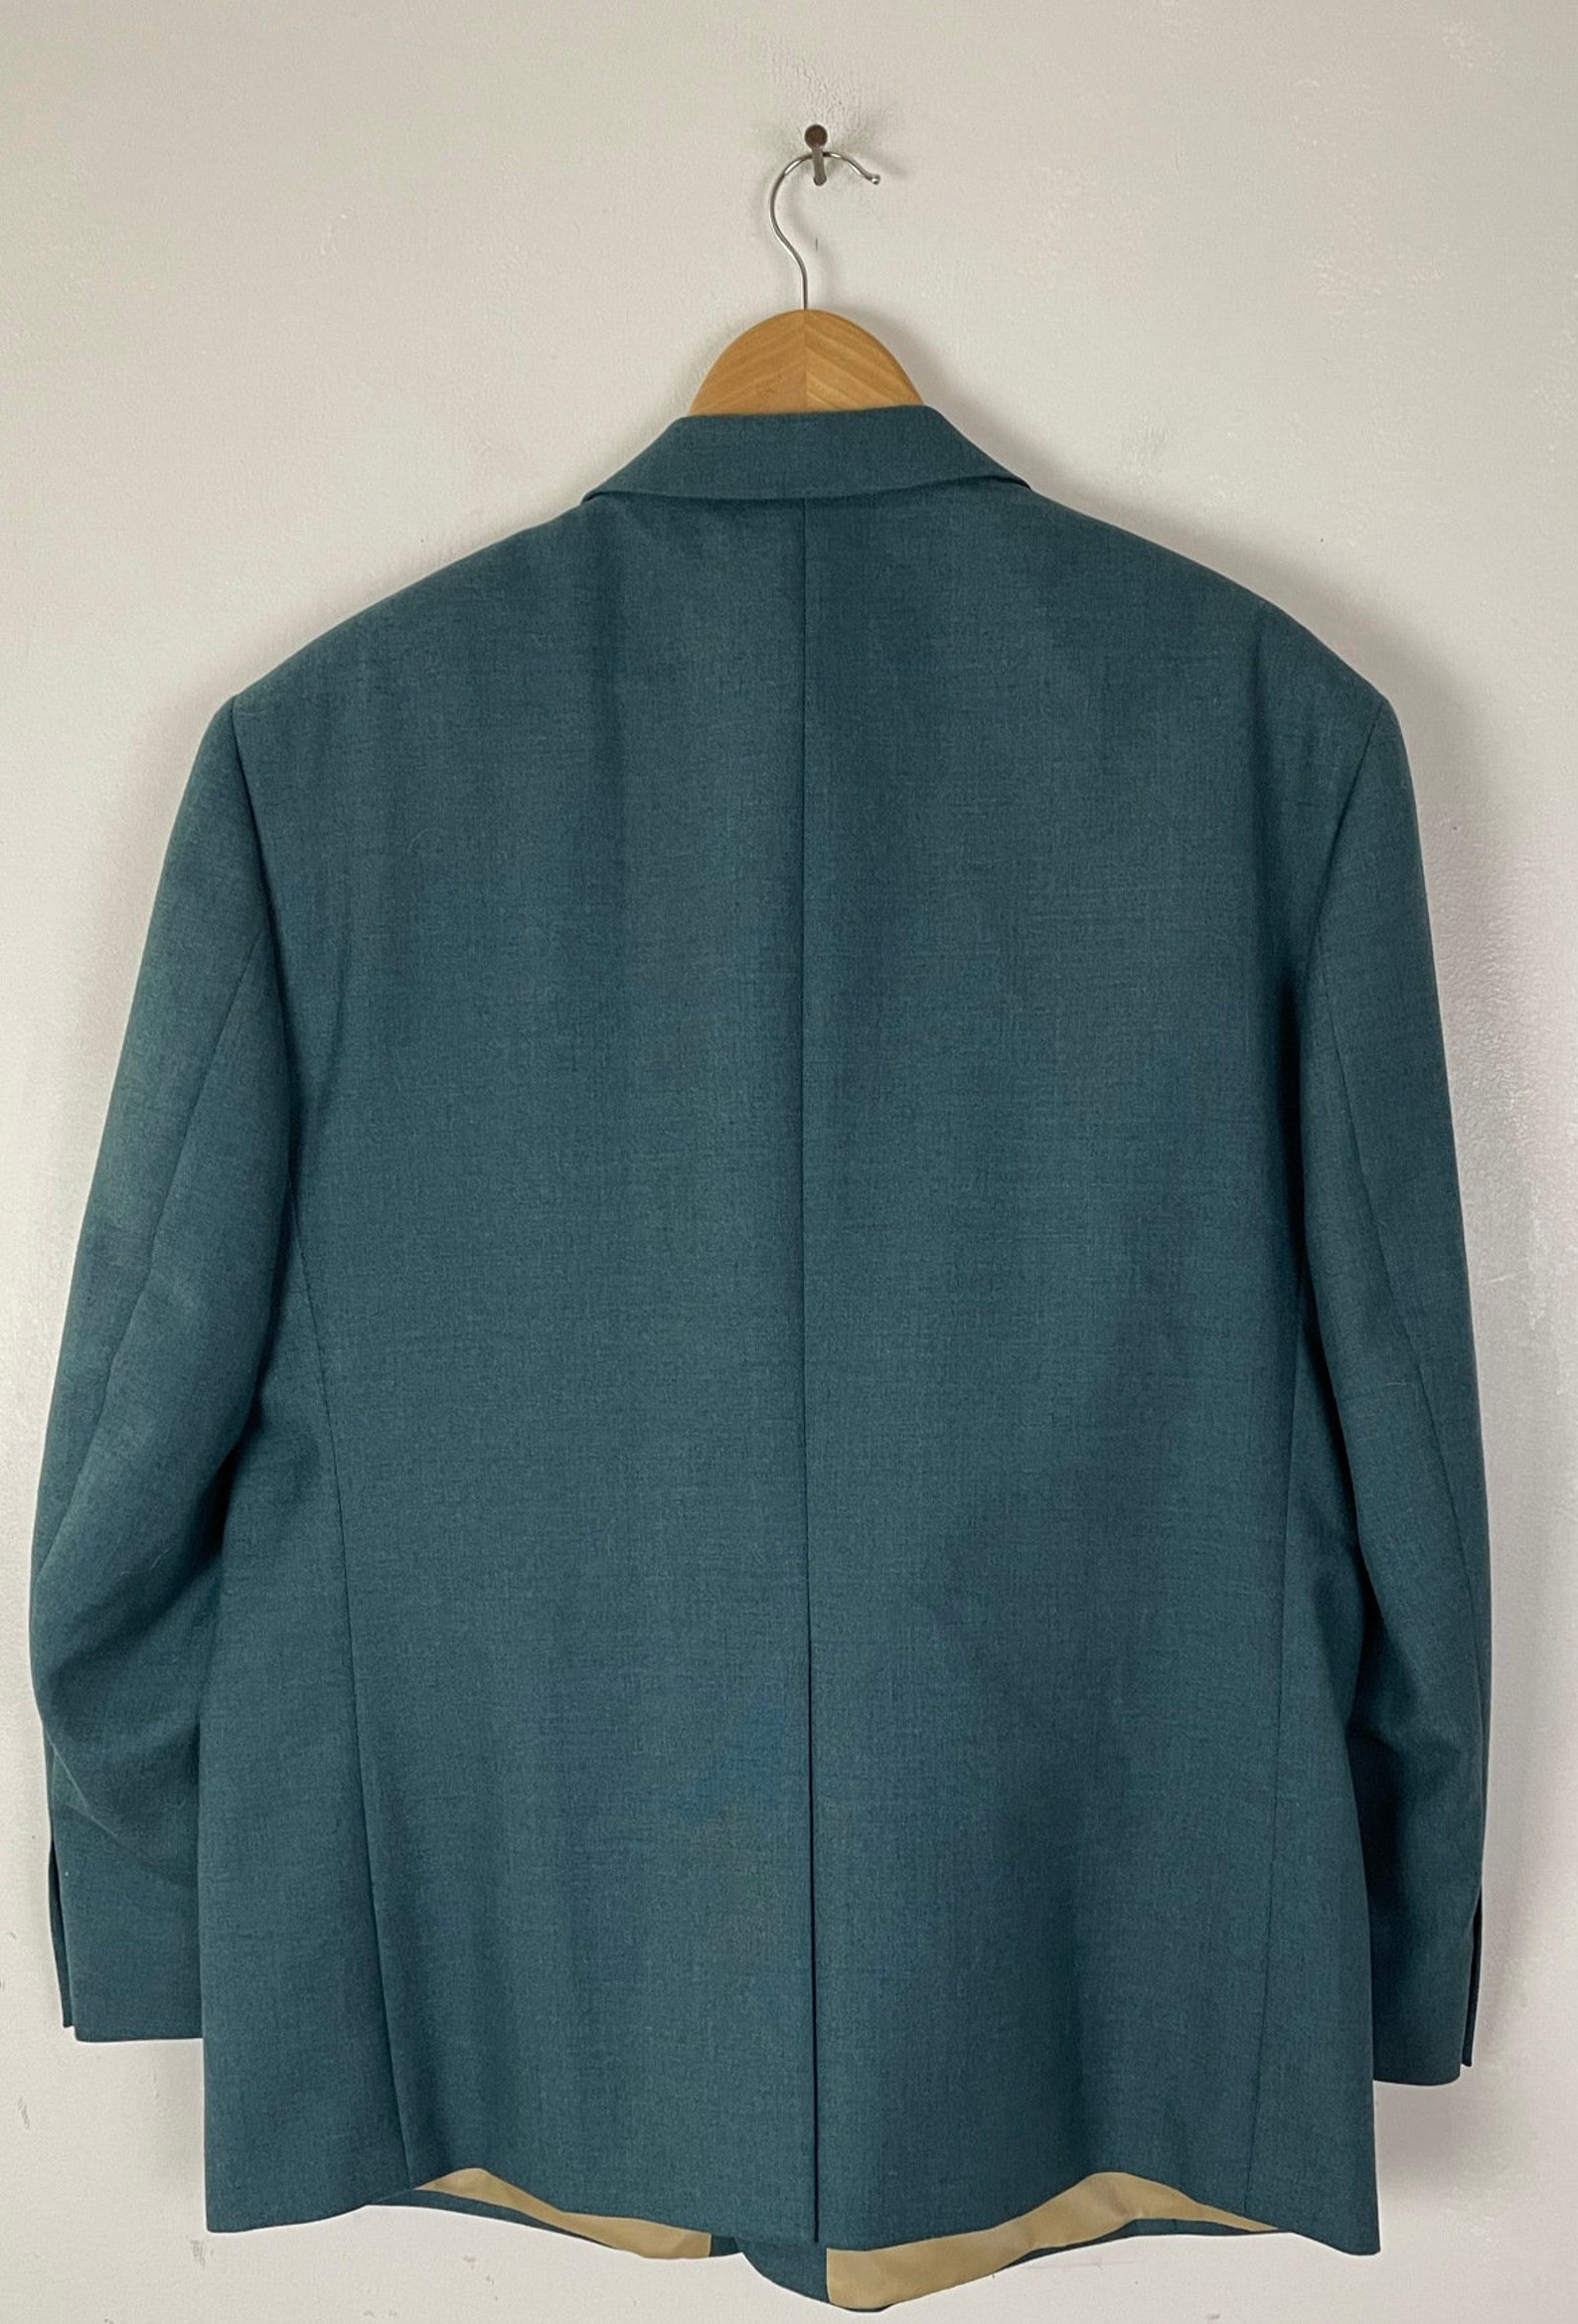 Vintage Dark Teal Sport Coat With Gold Buttons Mens Size 46S - Etsy